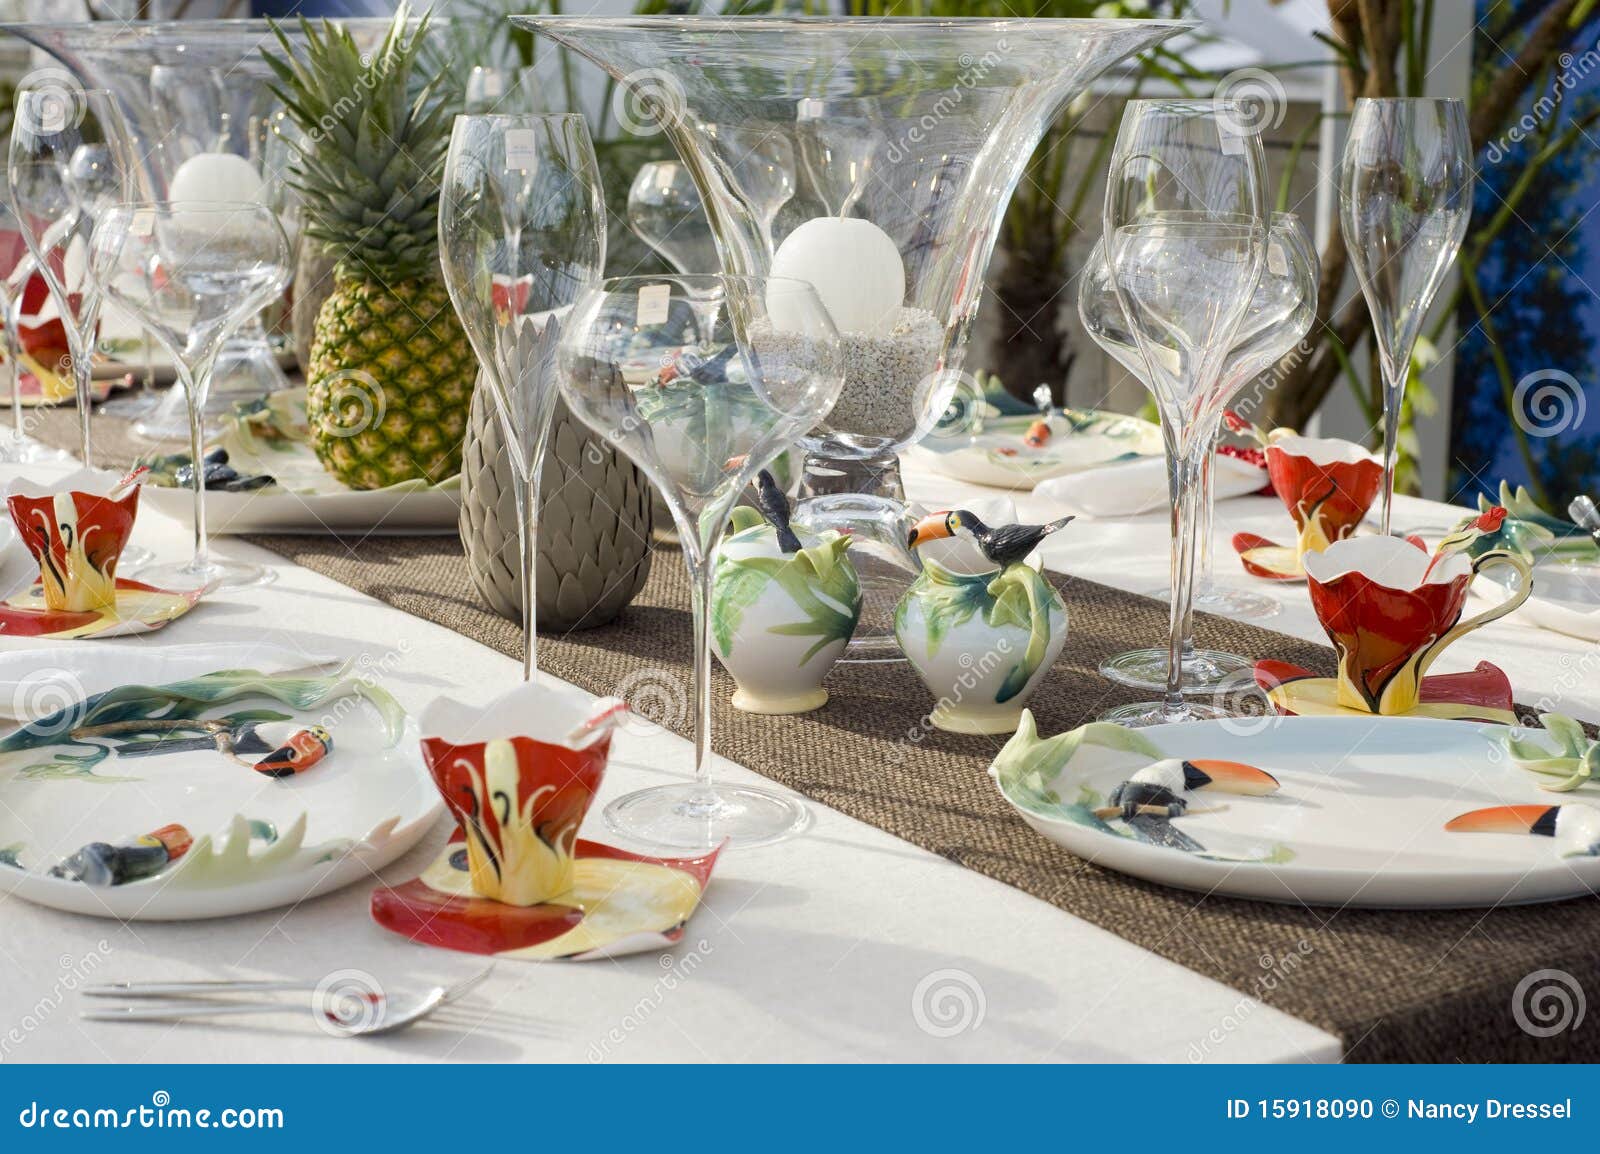 Modern Dining Table Setting Stock Photo - Image: 15918090